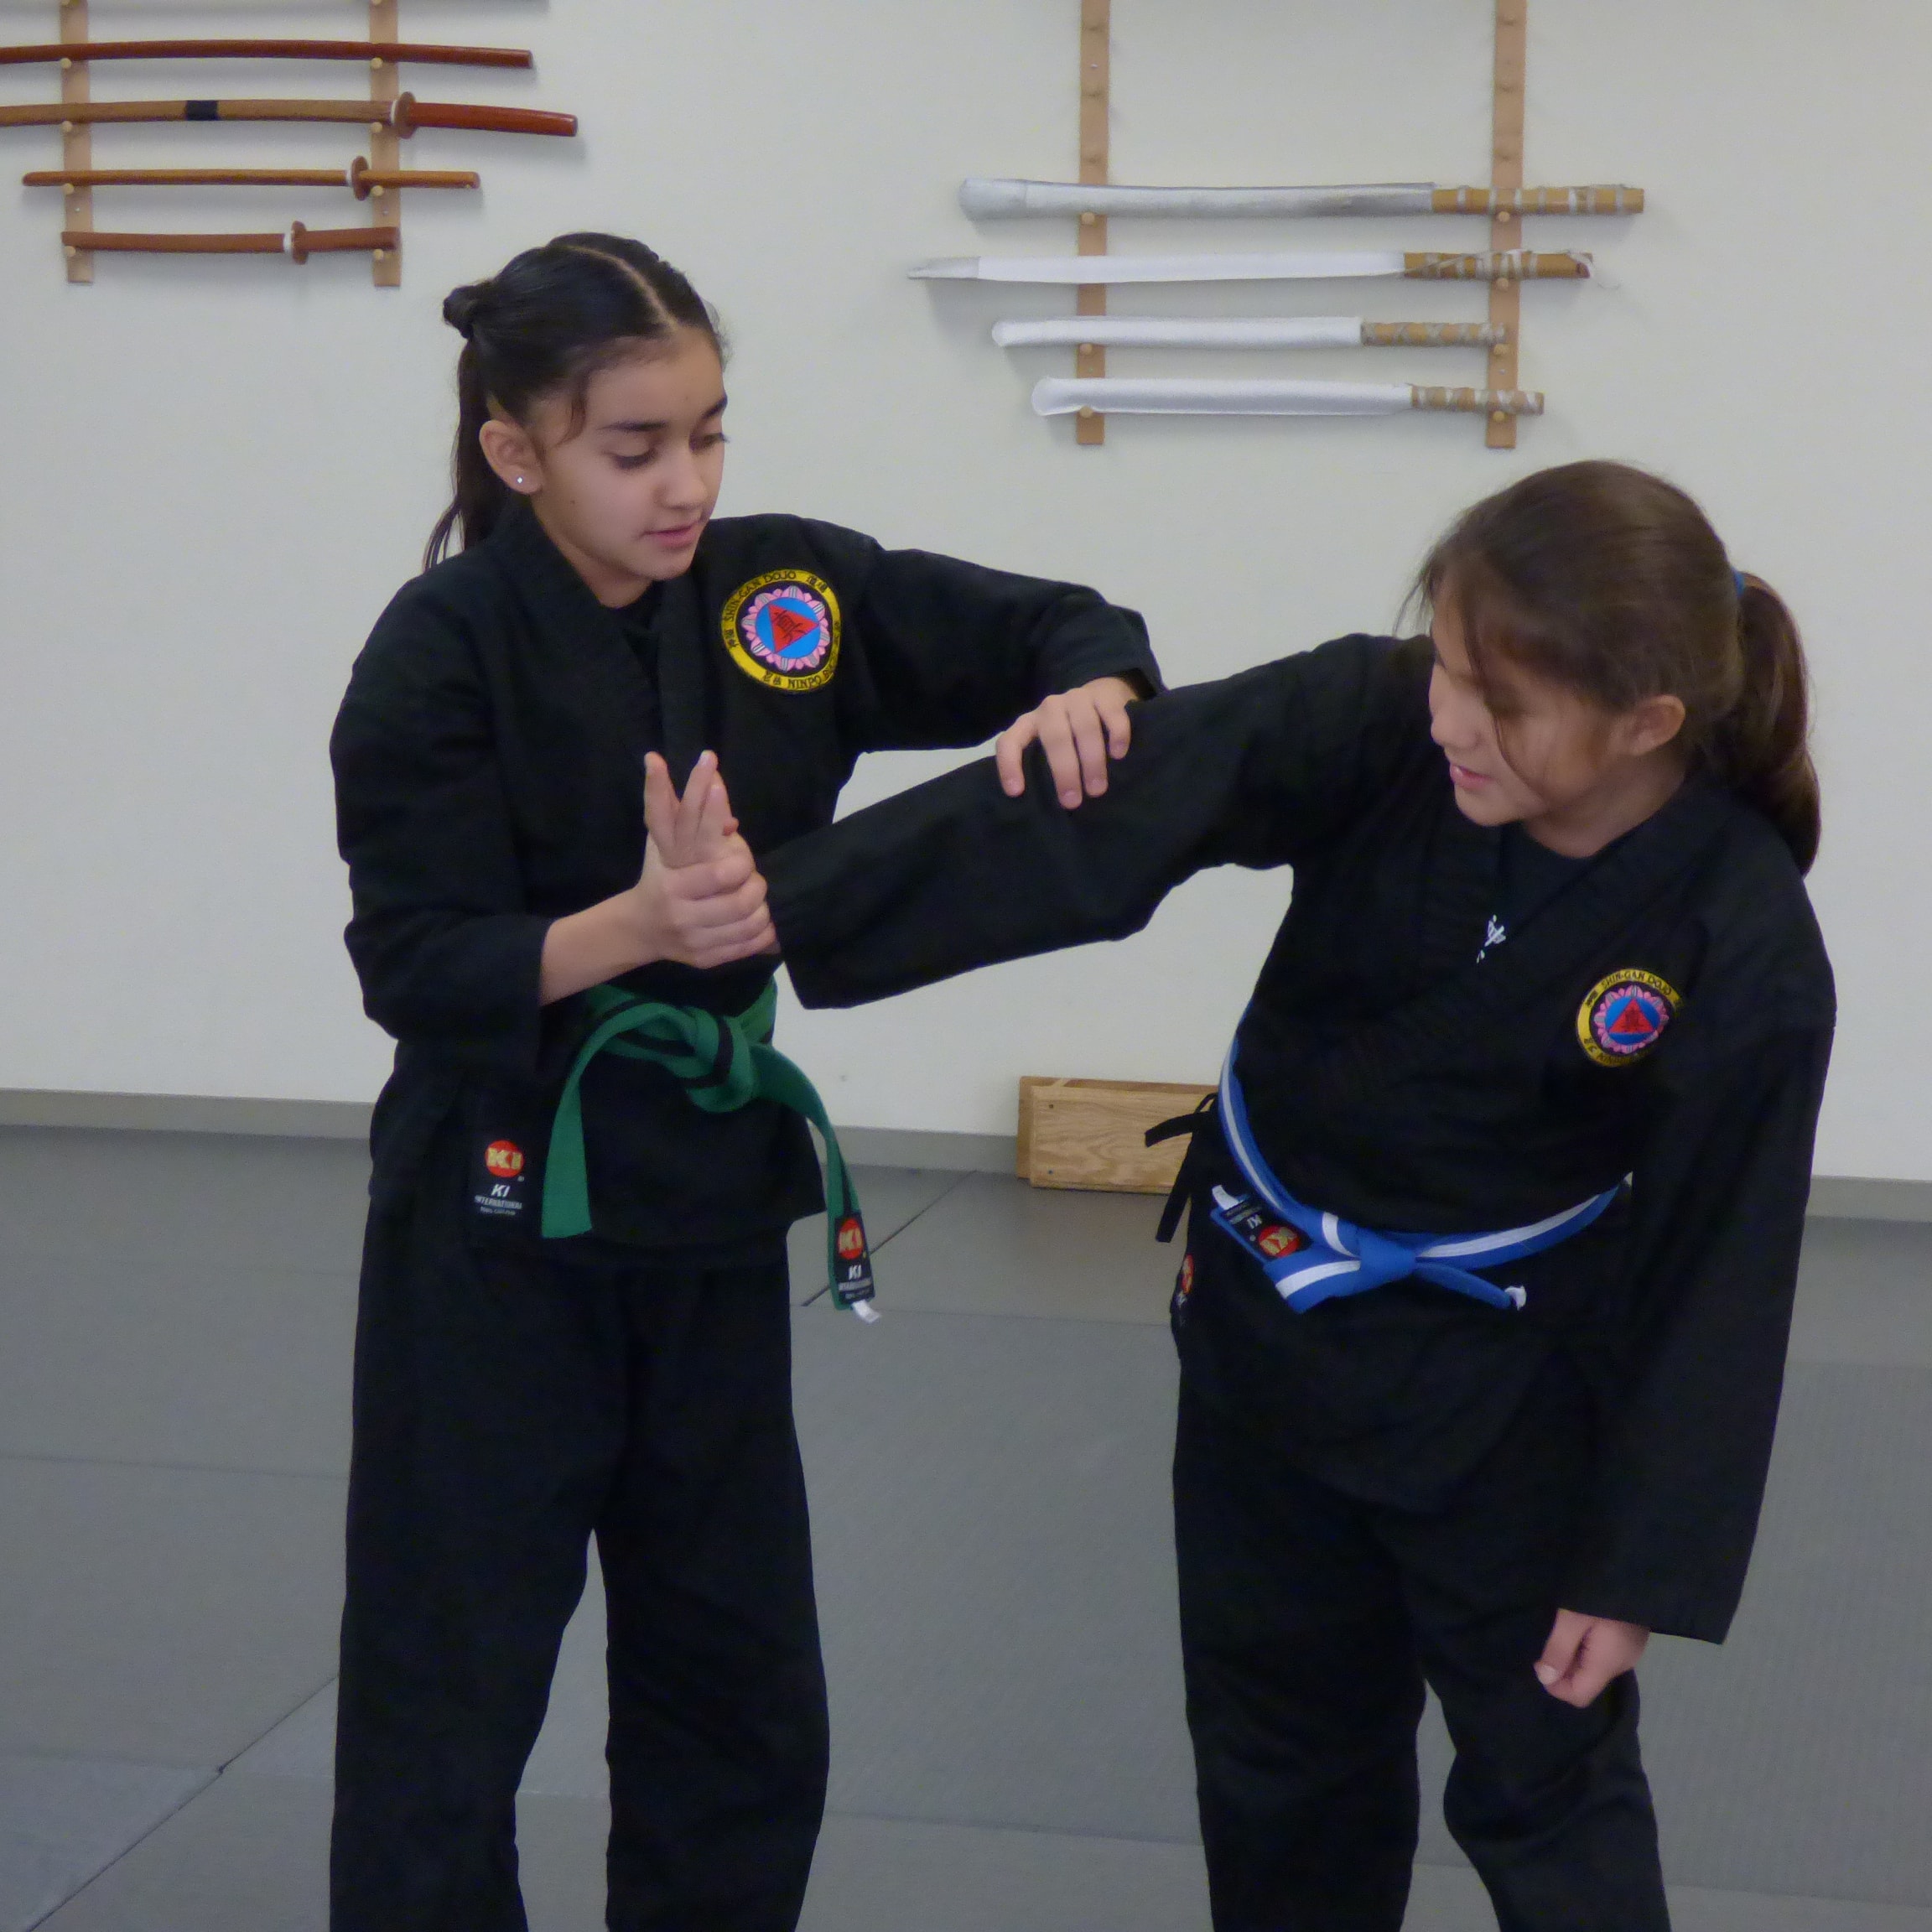 kids doing martial arts, check out our blog